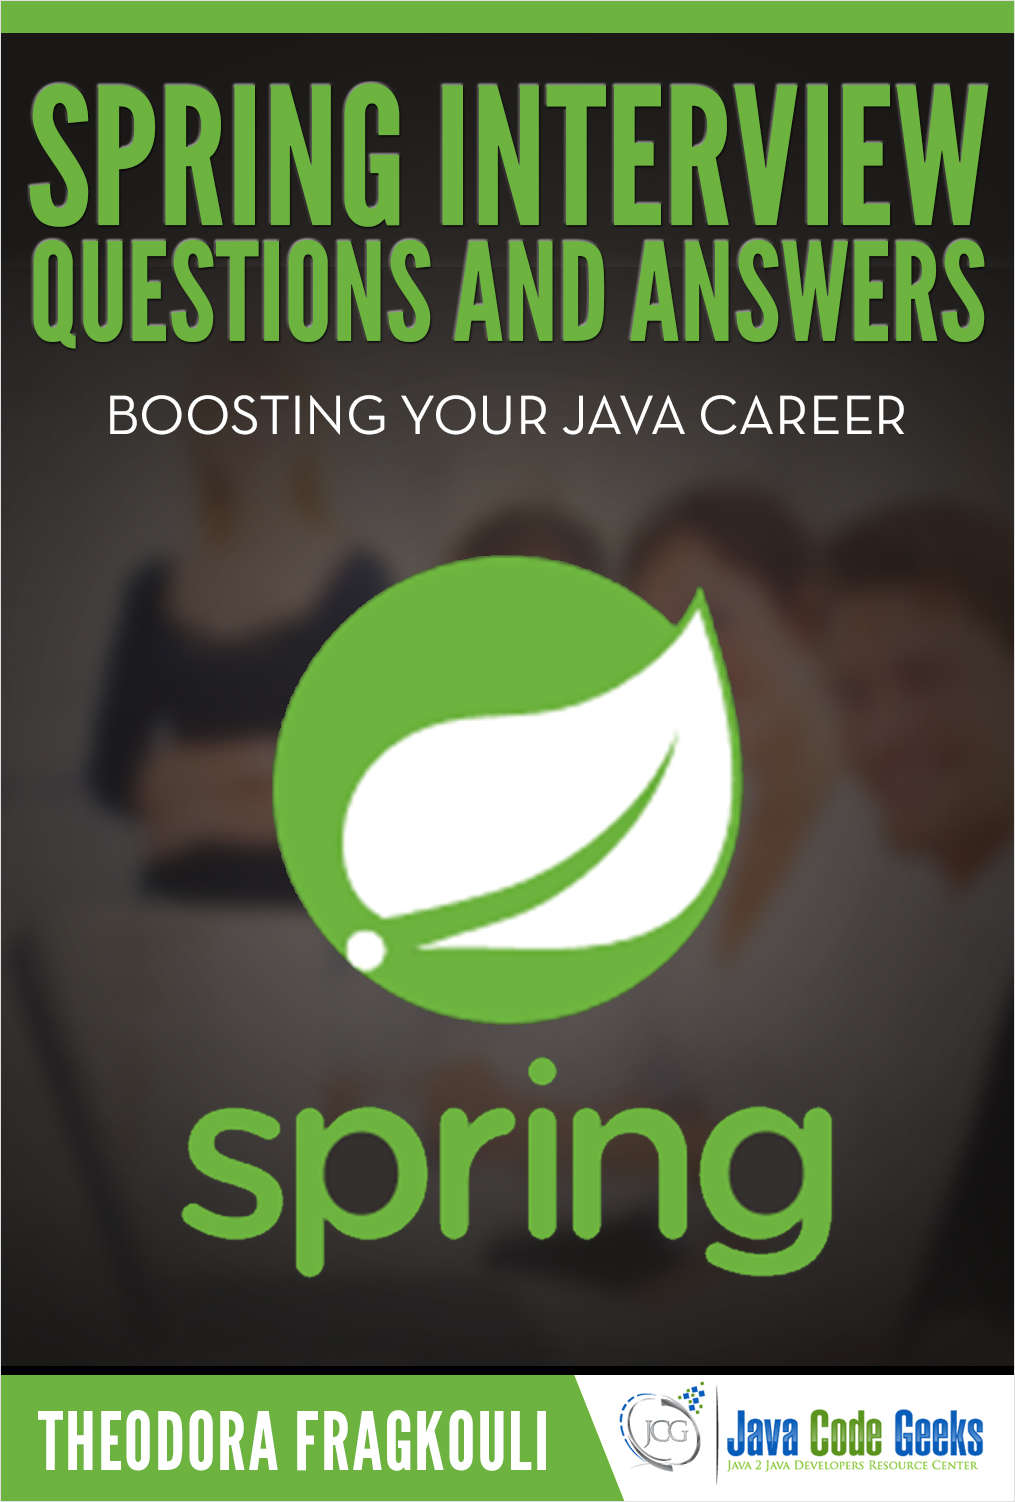 Spring Interview Questions and Answers